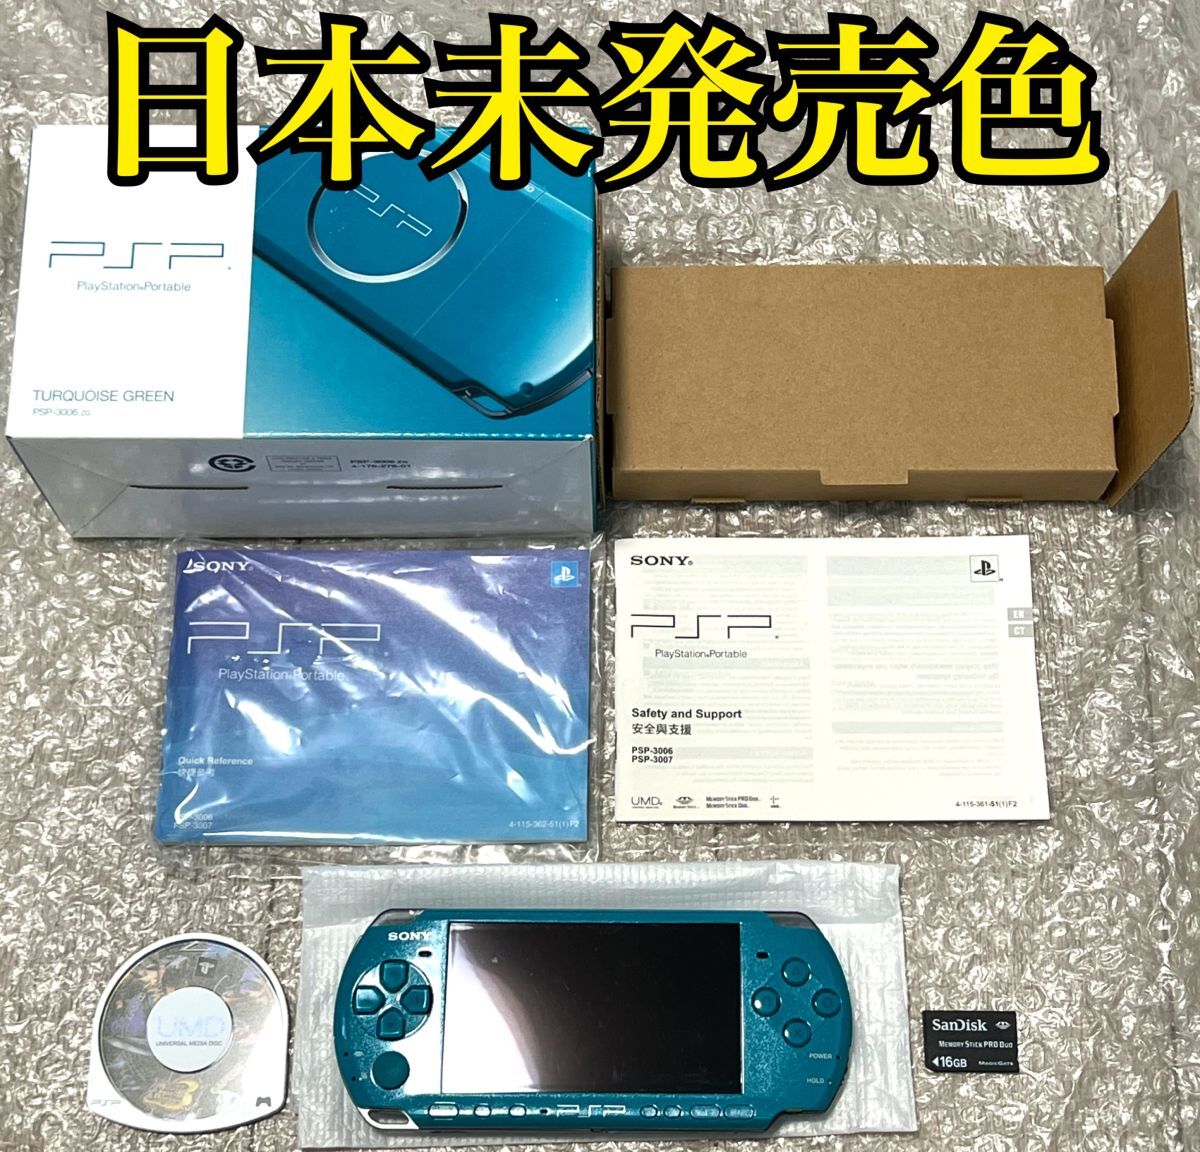 (. beautiful goods * not yet sale in Japan color * Asia version )PSP-3006(3000) body turquoise green + memory stick 16GB PlayStation Portable thin type 